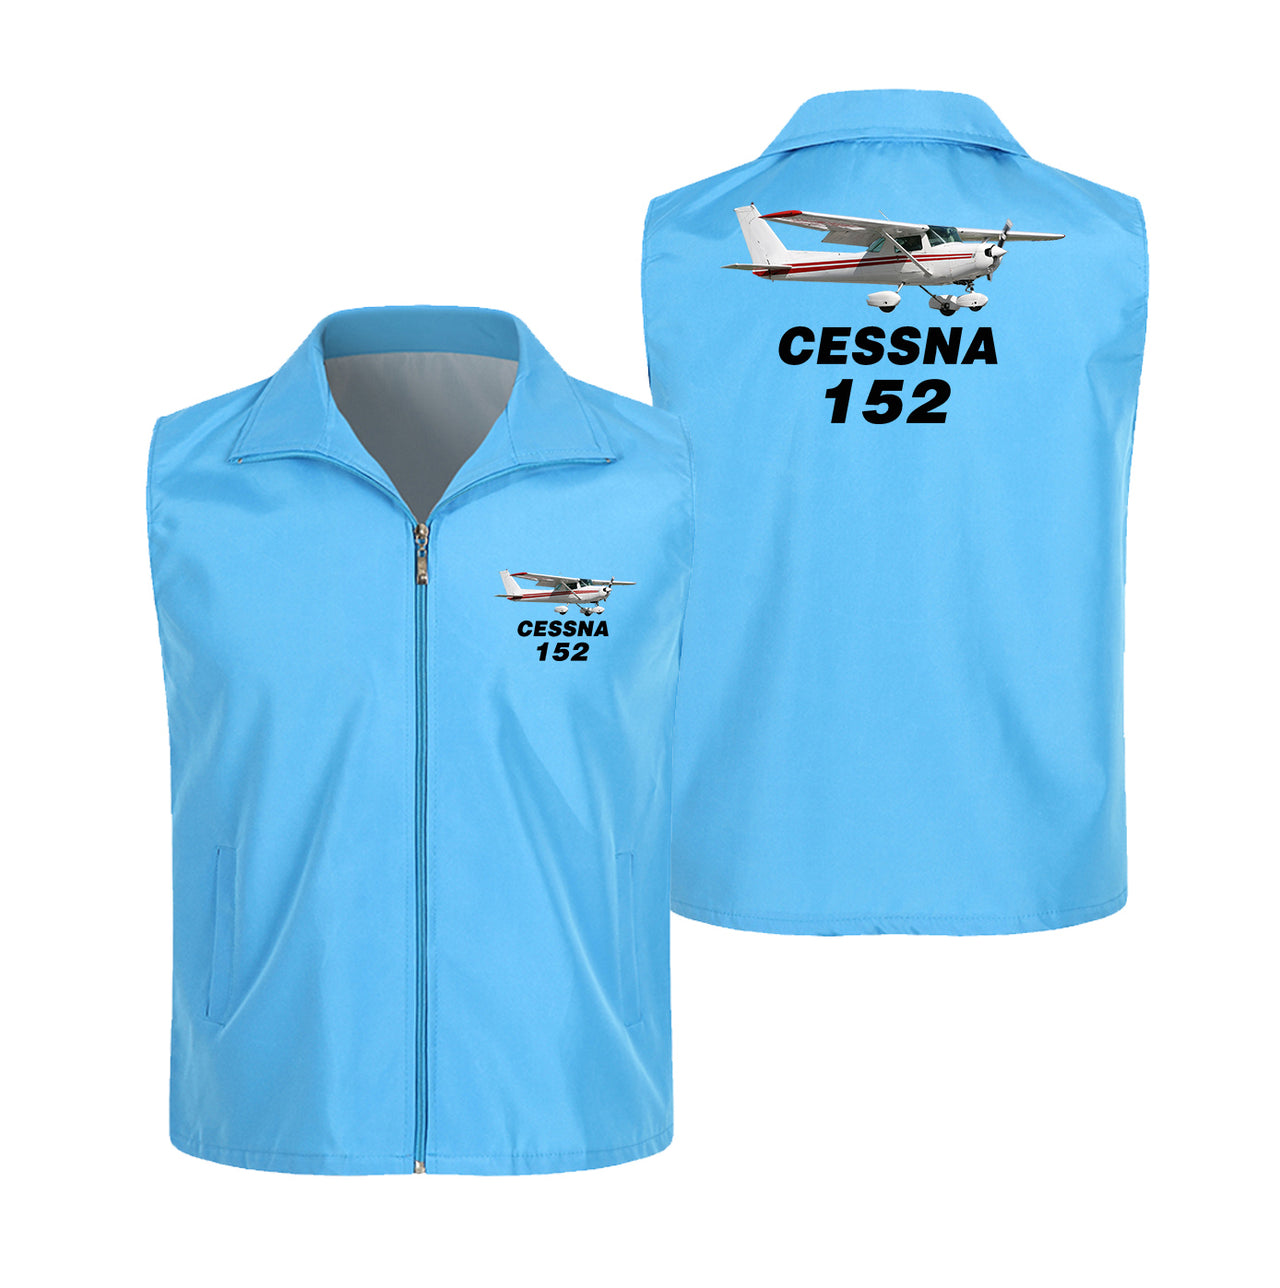 The Cessna 152 Designed Thin Style Vests